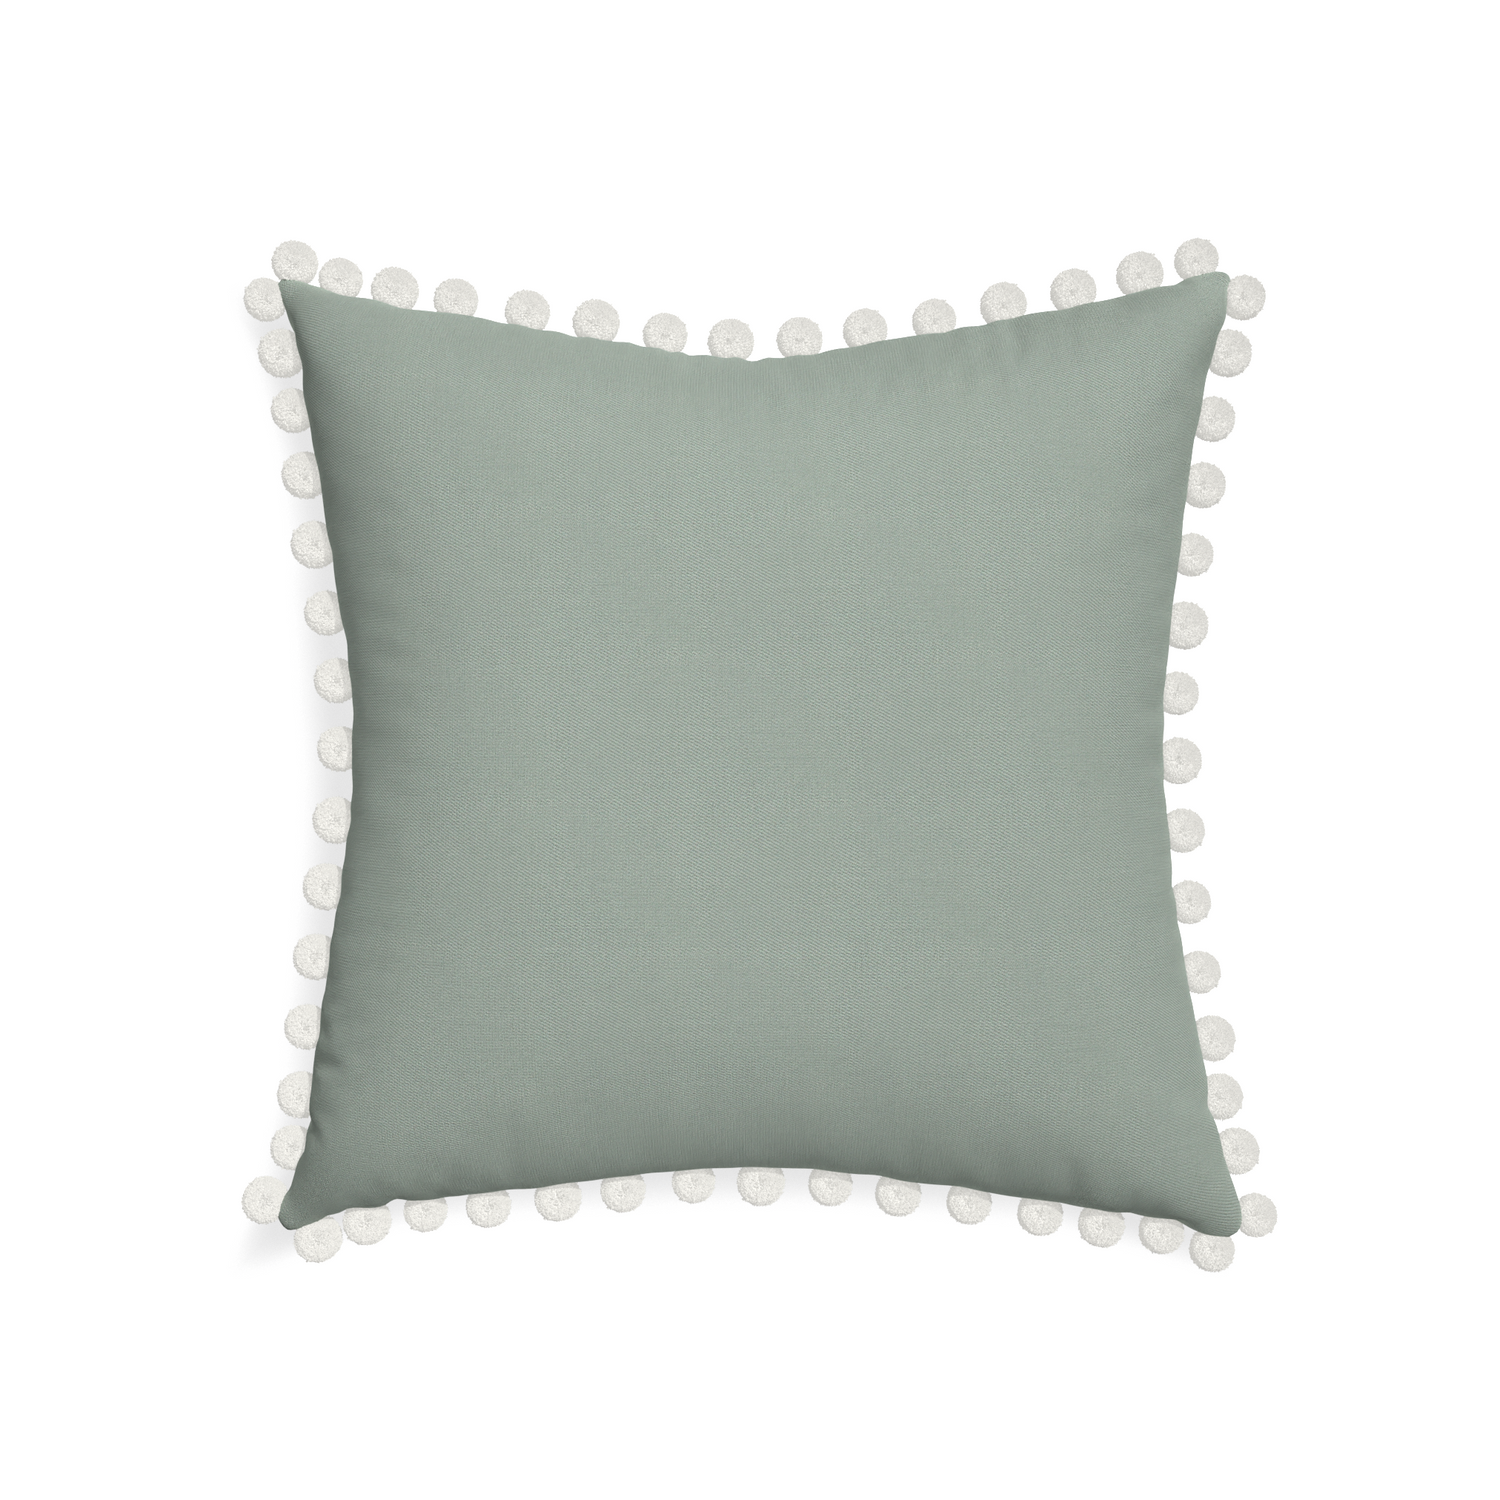 22-square sage custom sage green cottonpillow with snow pom pom on white background